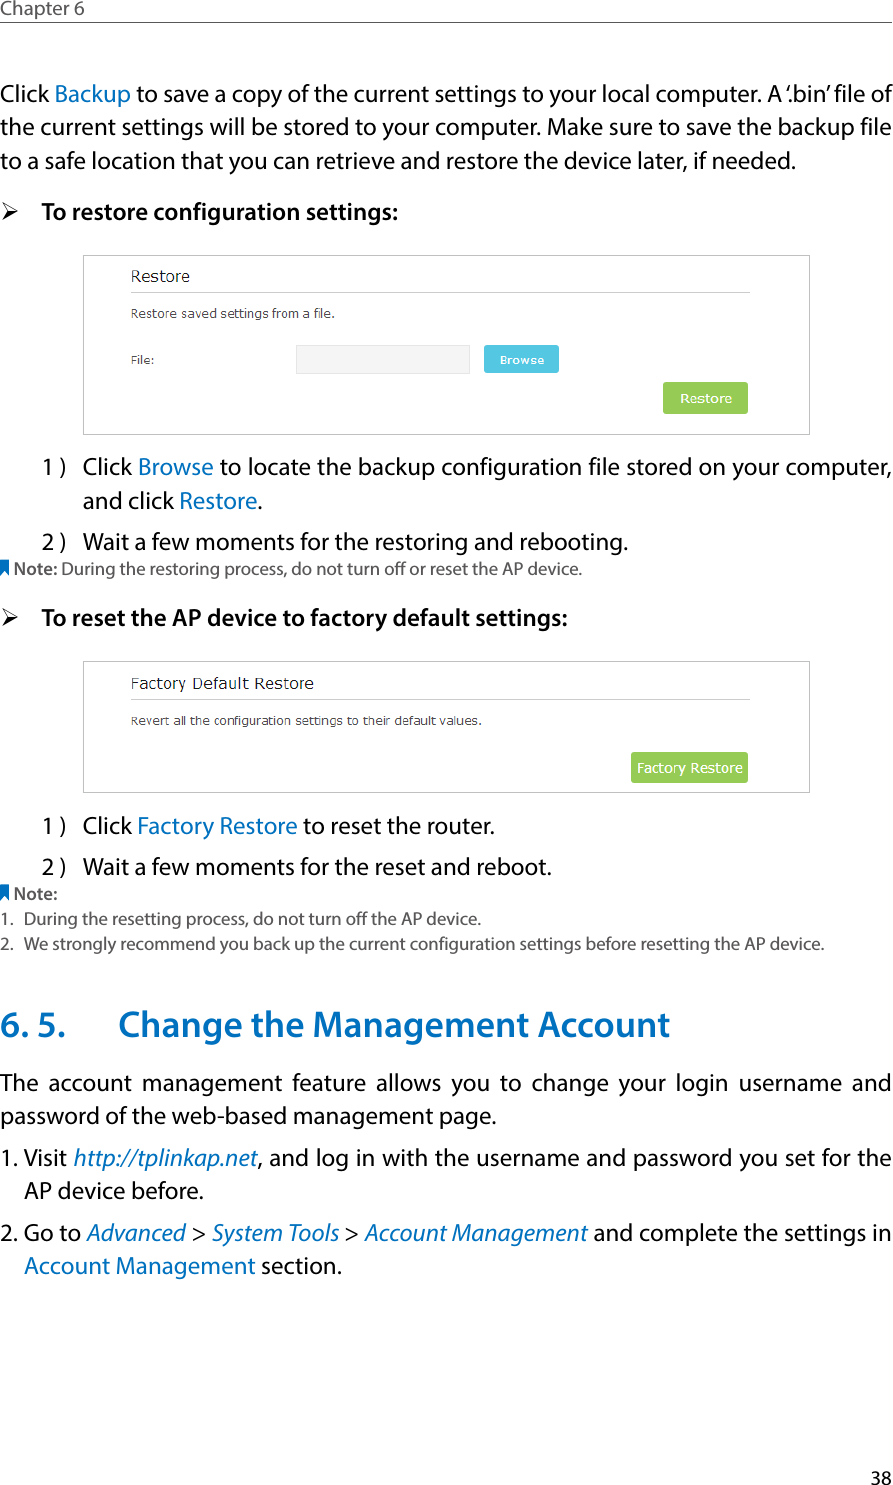 38Chapter 6  Click Backup to save a copy of the current settings to your local computer. A ‘.bin’ file of the current settings will be stored to your computer. Make sure to save the backup file to a safe location that you can retrieve and restore the device later, if needed. ¾To restore configuration settings:  1 )  Click Browse to locate the backup configuration file stored on your computer, and click Restore. 2 )  Wait a few moments for the restoring and rebooting. Note: During the restoring process, do not turn off or reset the AP device.  ¾To reset the AP device to factory default settings: 1 )  Click Factory Restore to reset the router. 2 )  Wait a few moments for the reset and reboot. Note: 1.  During the resetting process, do not turn off the AP device. 2.  We strongly recommend you back up the current configuration settings before resetting the AP device.6. 5.  Change the Management AccountThe account management feature allows you to change your login username and password of the web-based management page.1. Visit http://tplinkap.net, and log in with the username and password you set for the  AP device before.2. Go to Advanced &gt; System Tools &gt; Account Management and complete the settings in Account Management section.